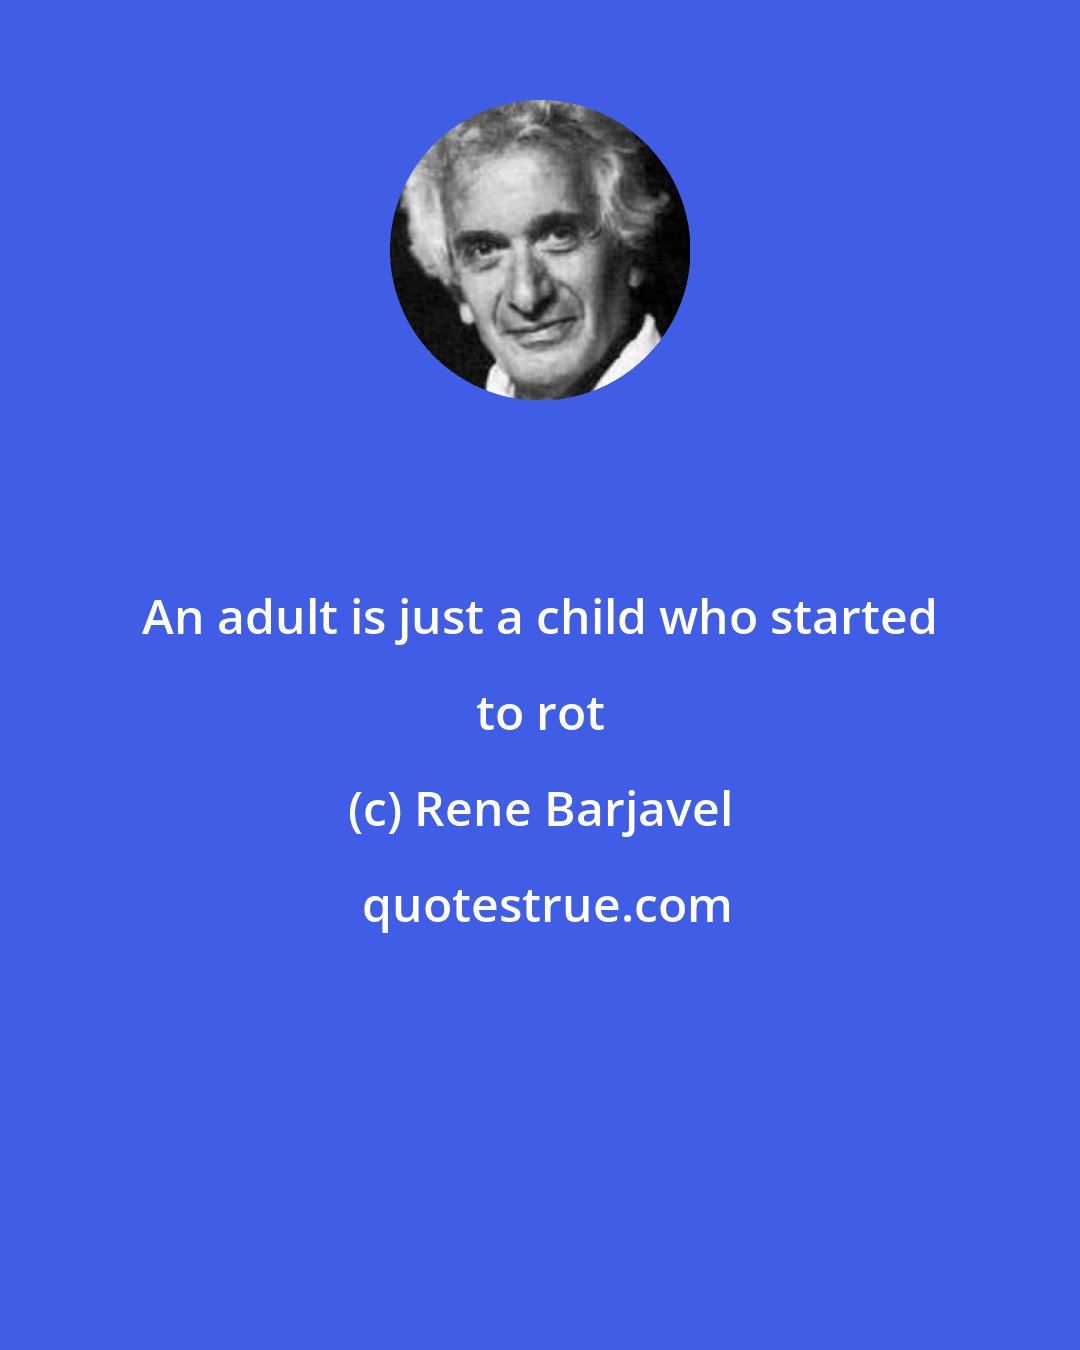 Rene Barjavel: An adult is just a child who started to rot